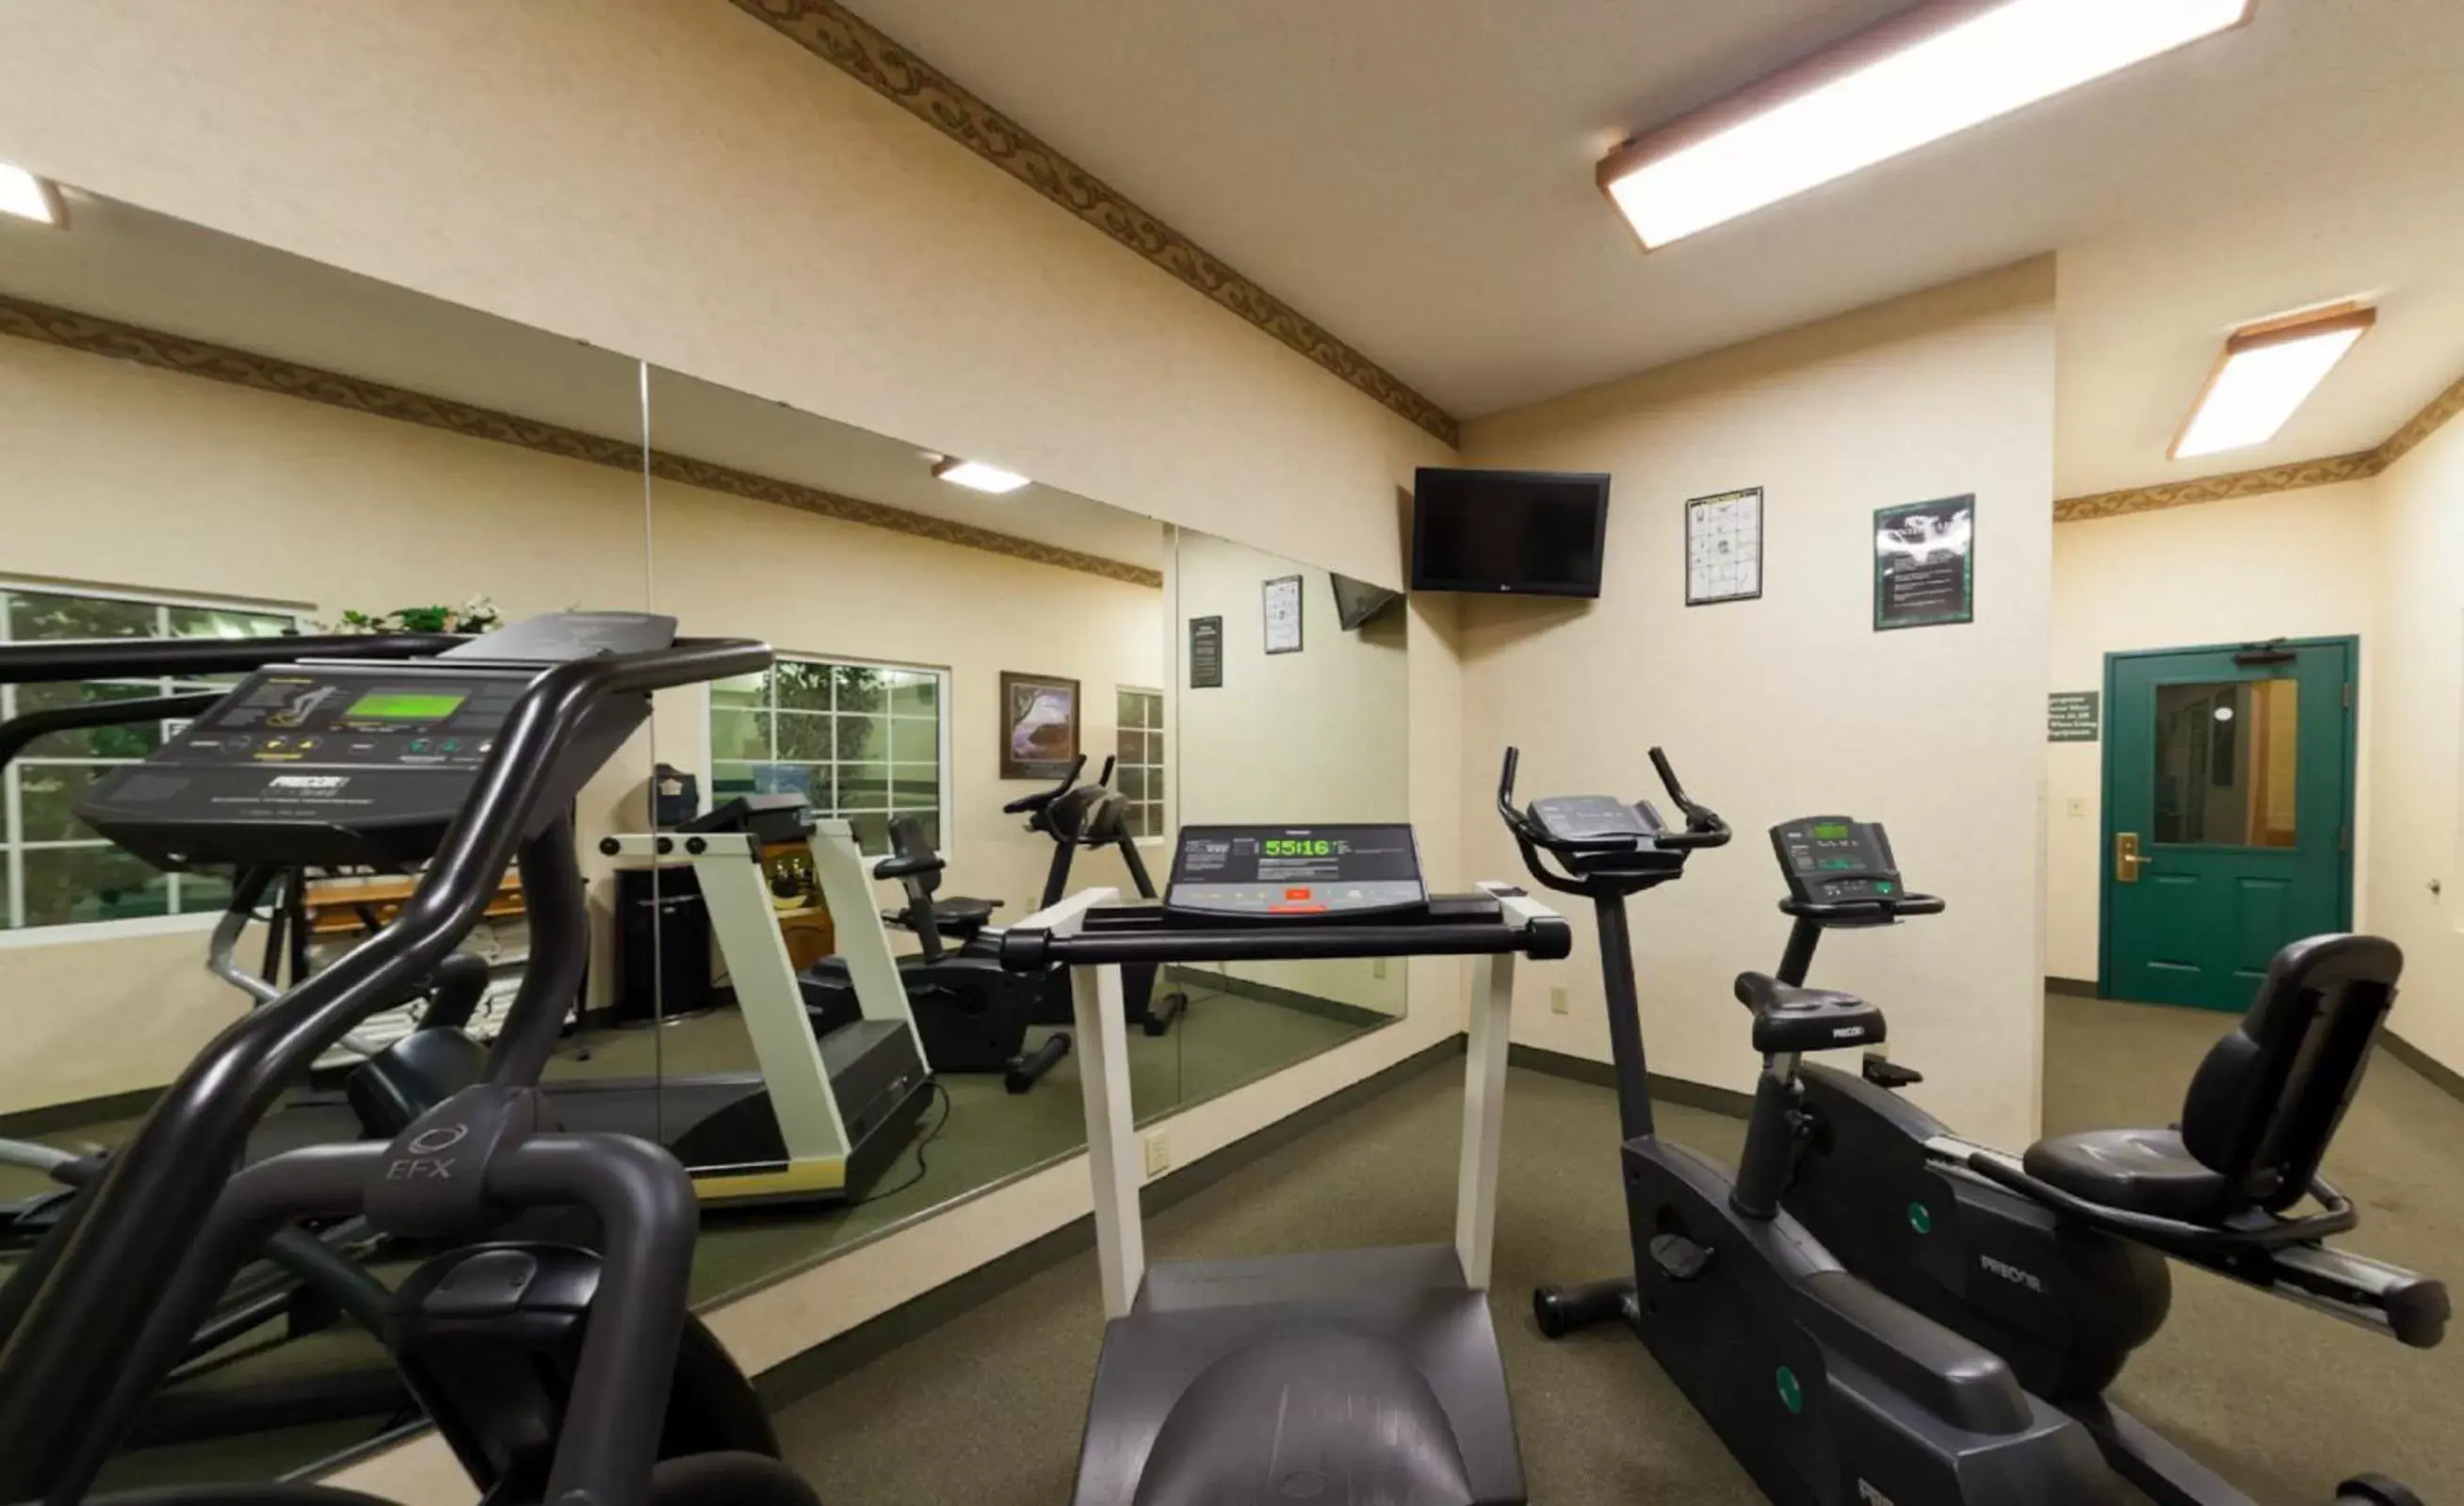 Fitness centre/facilities, Fitness Center/Facilities in Country Inn & Suites by Radisson, Salina, KS